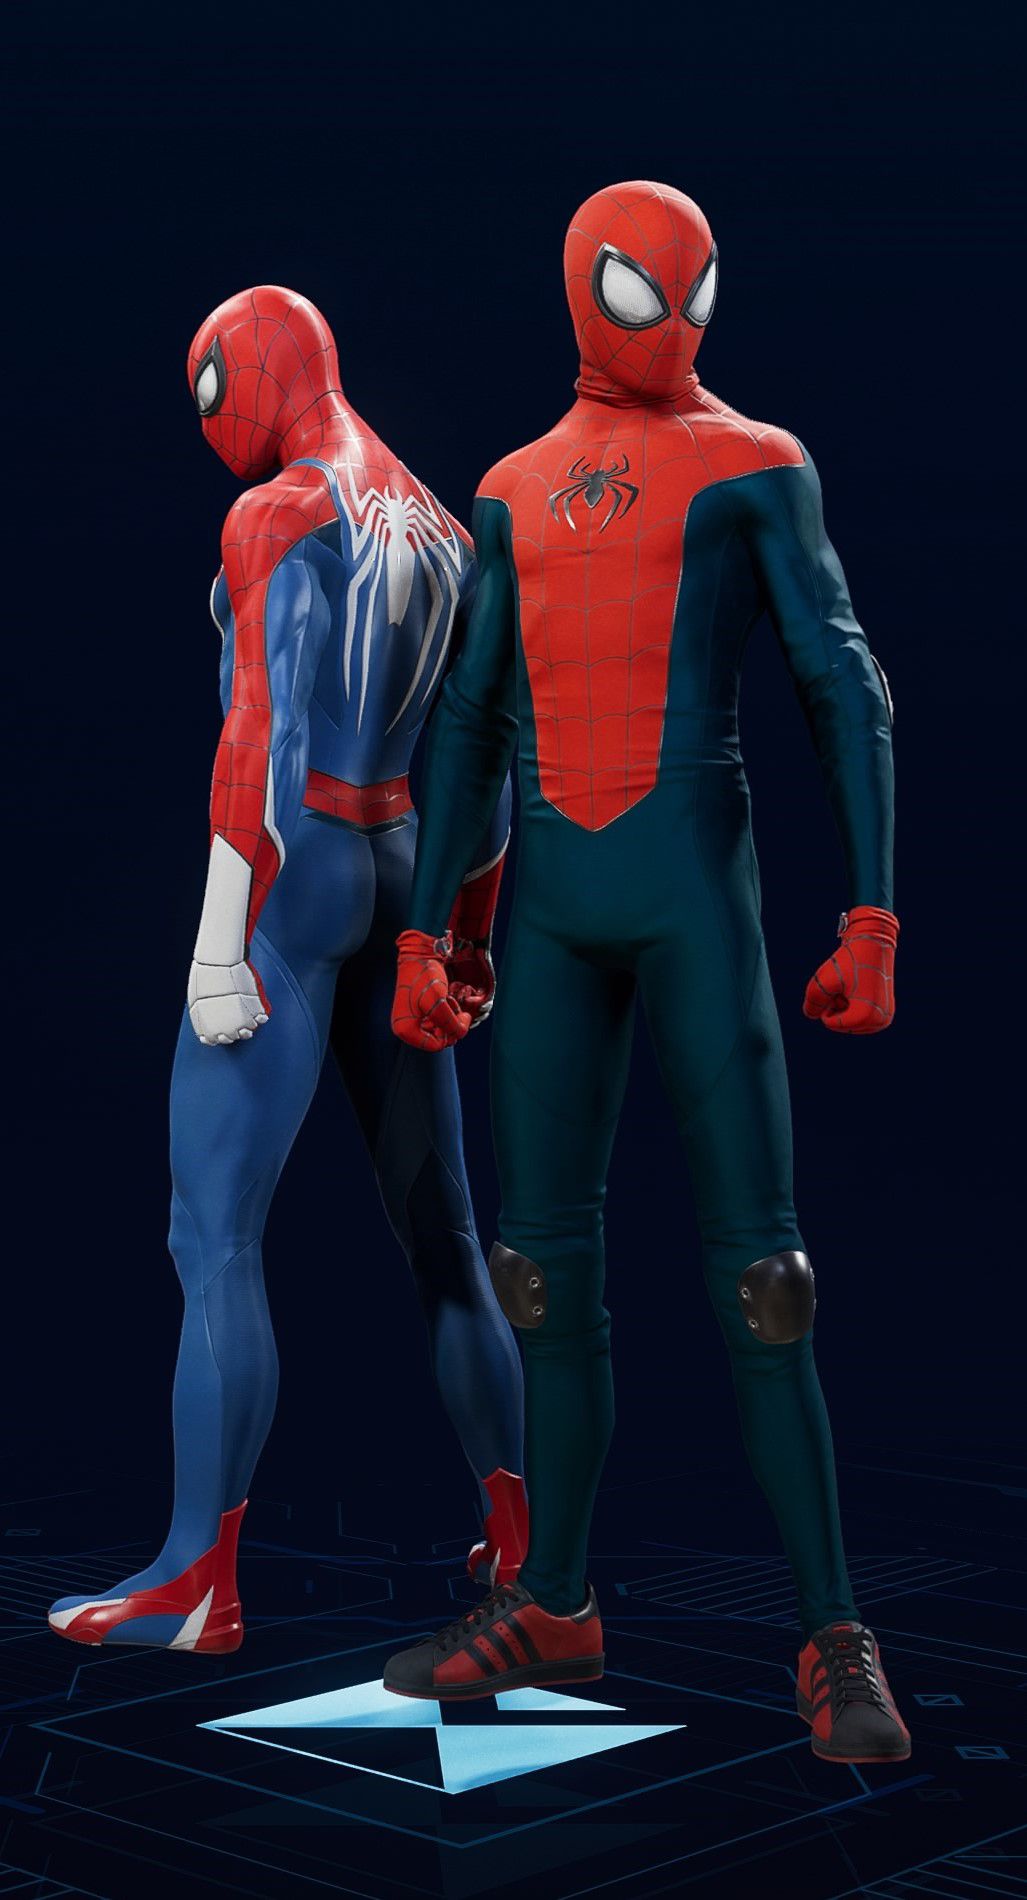 Miles Morales stands in his Great Responsibility Suit in the suit selection screen of Spider-Man 2.